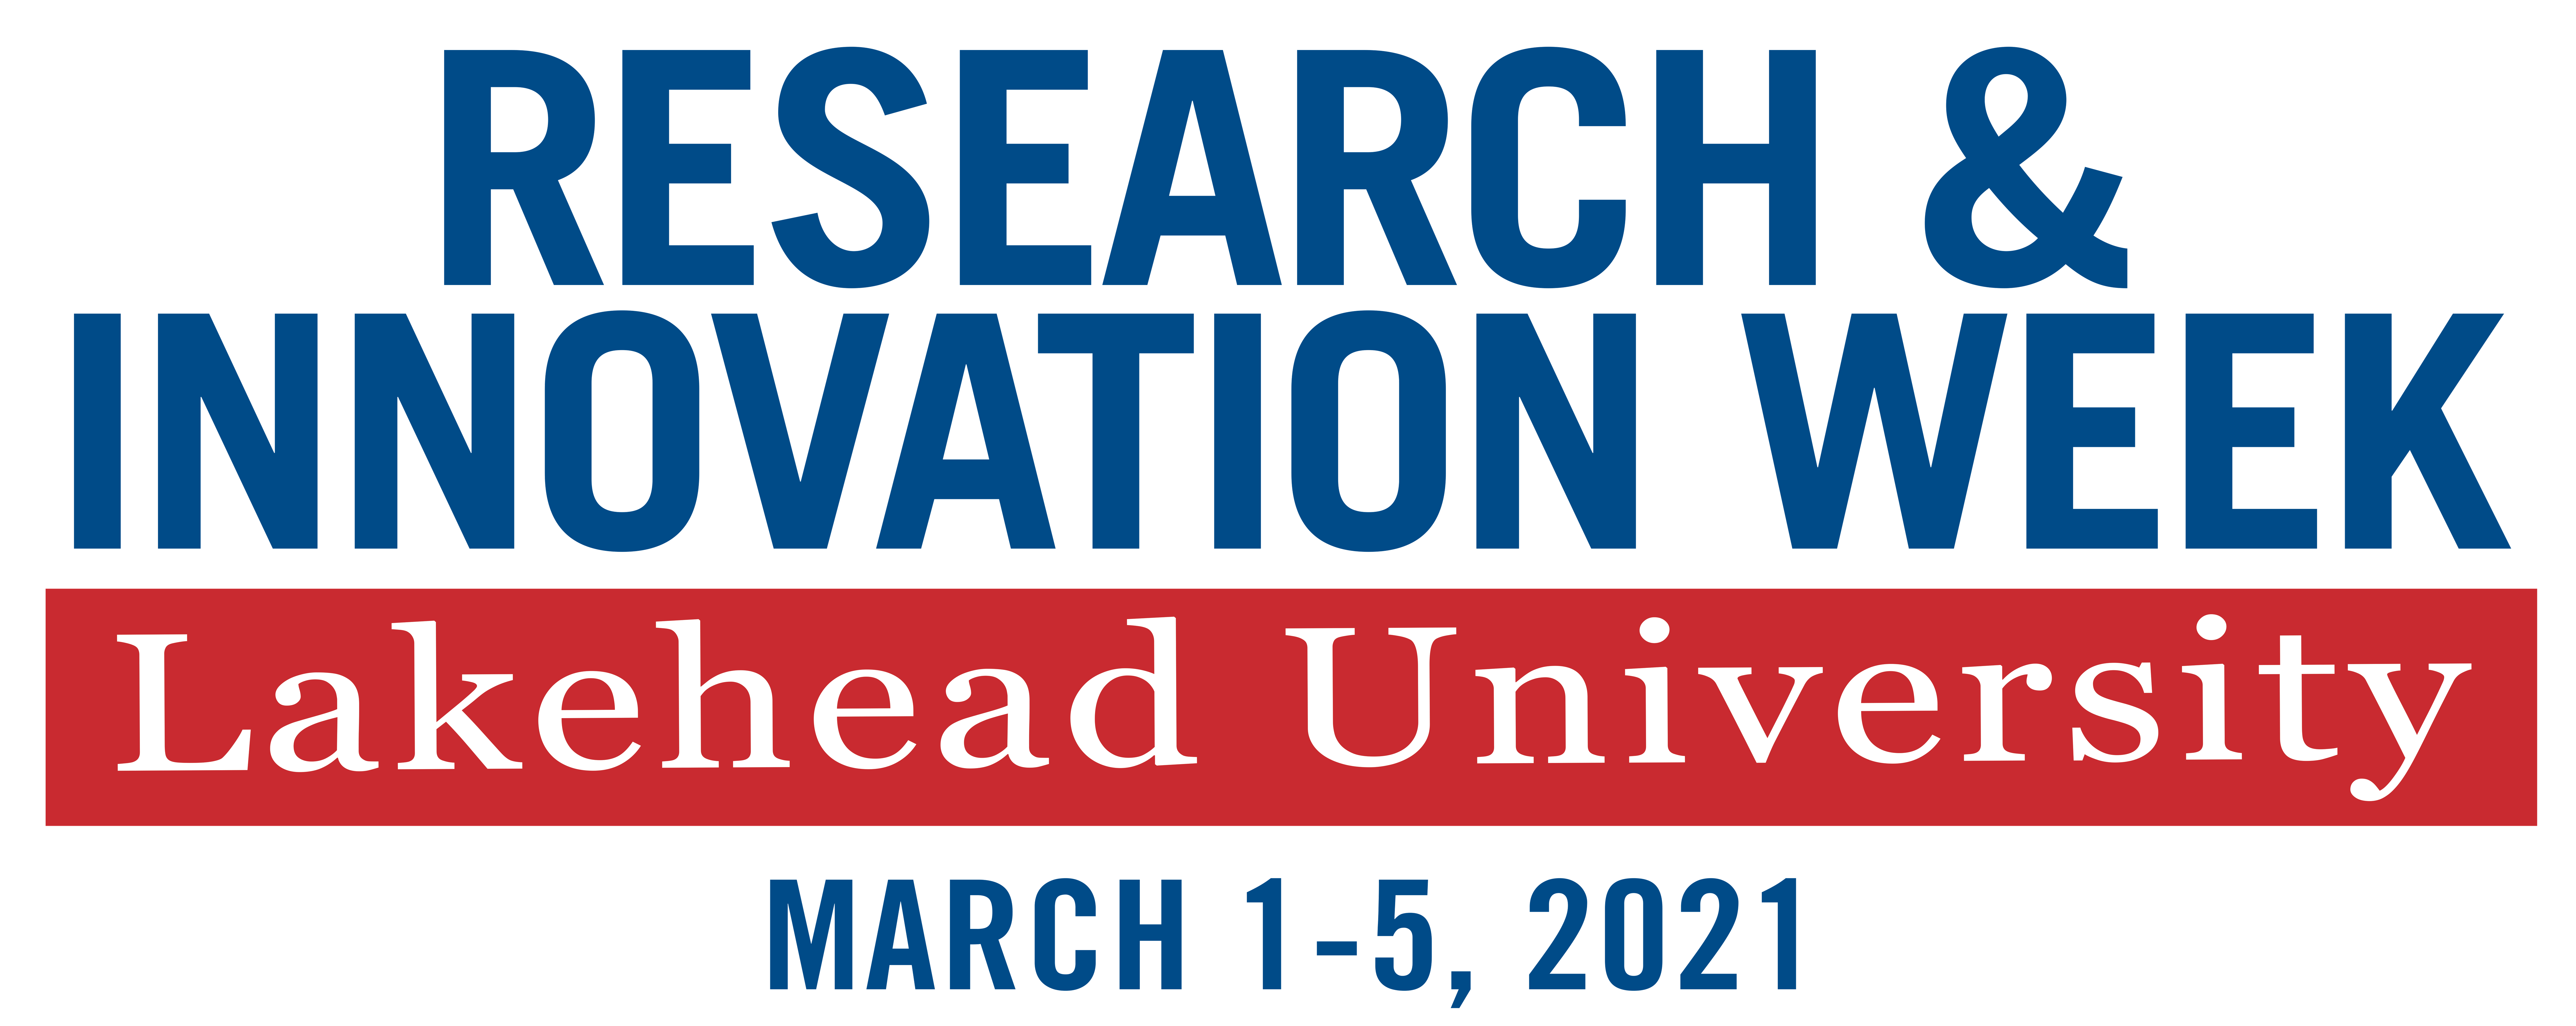 Research and Innovation Week 2021 - March 1-5, 2021